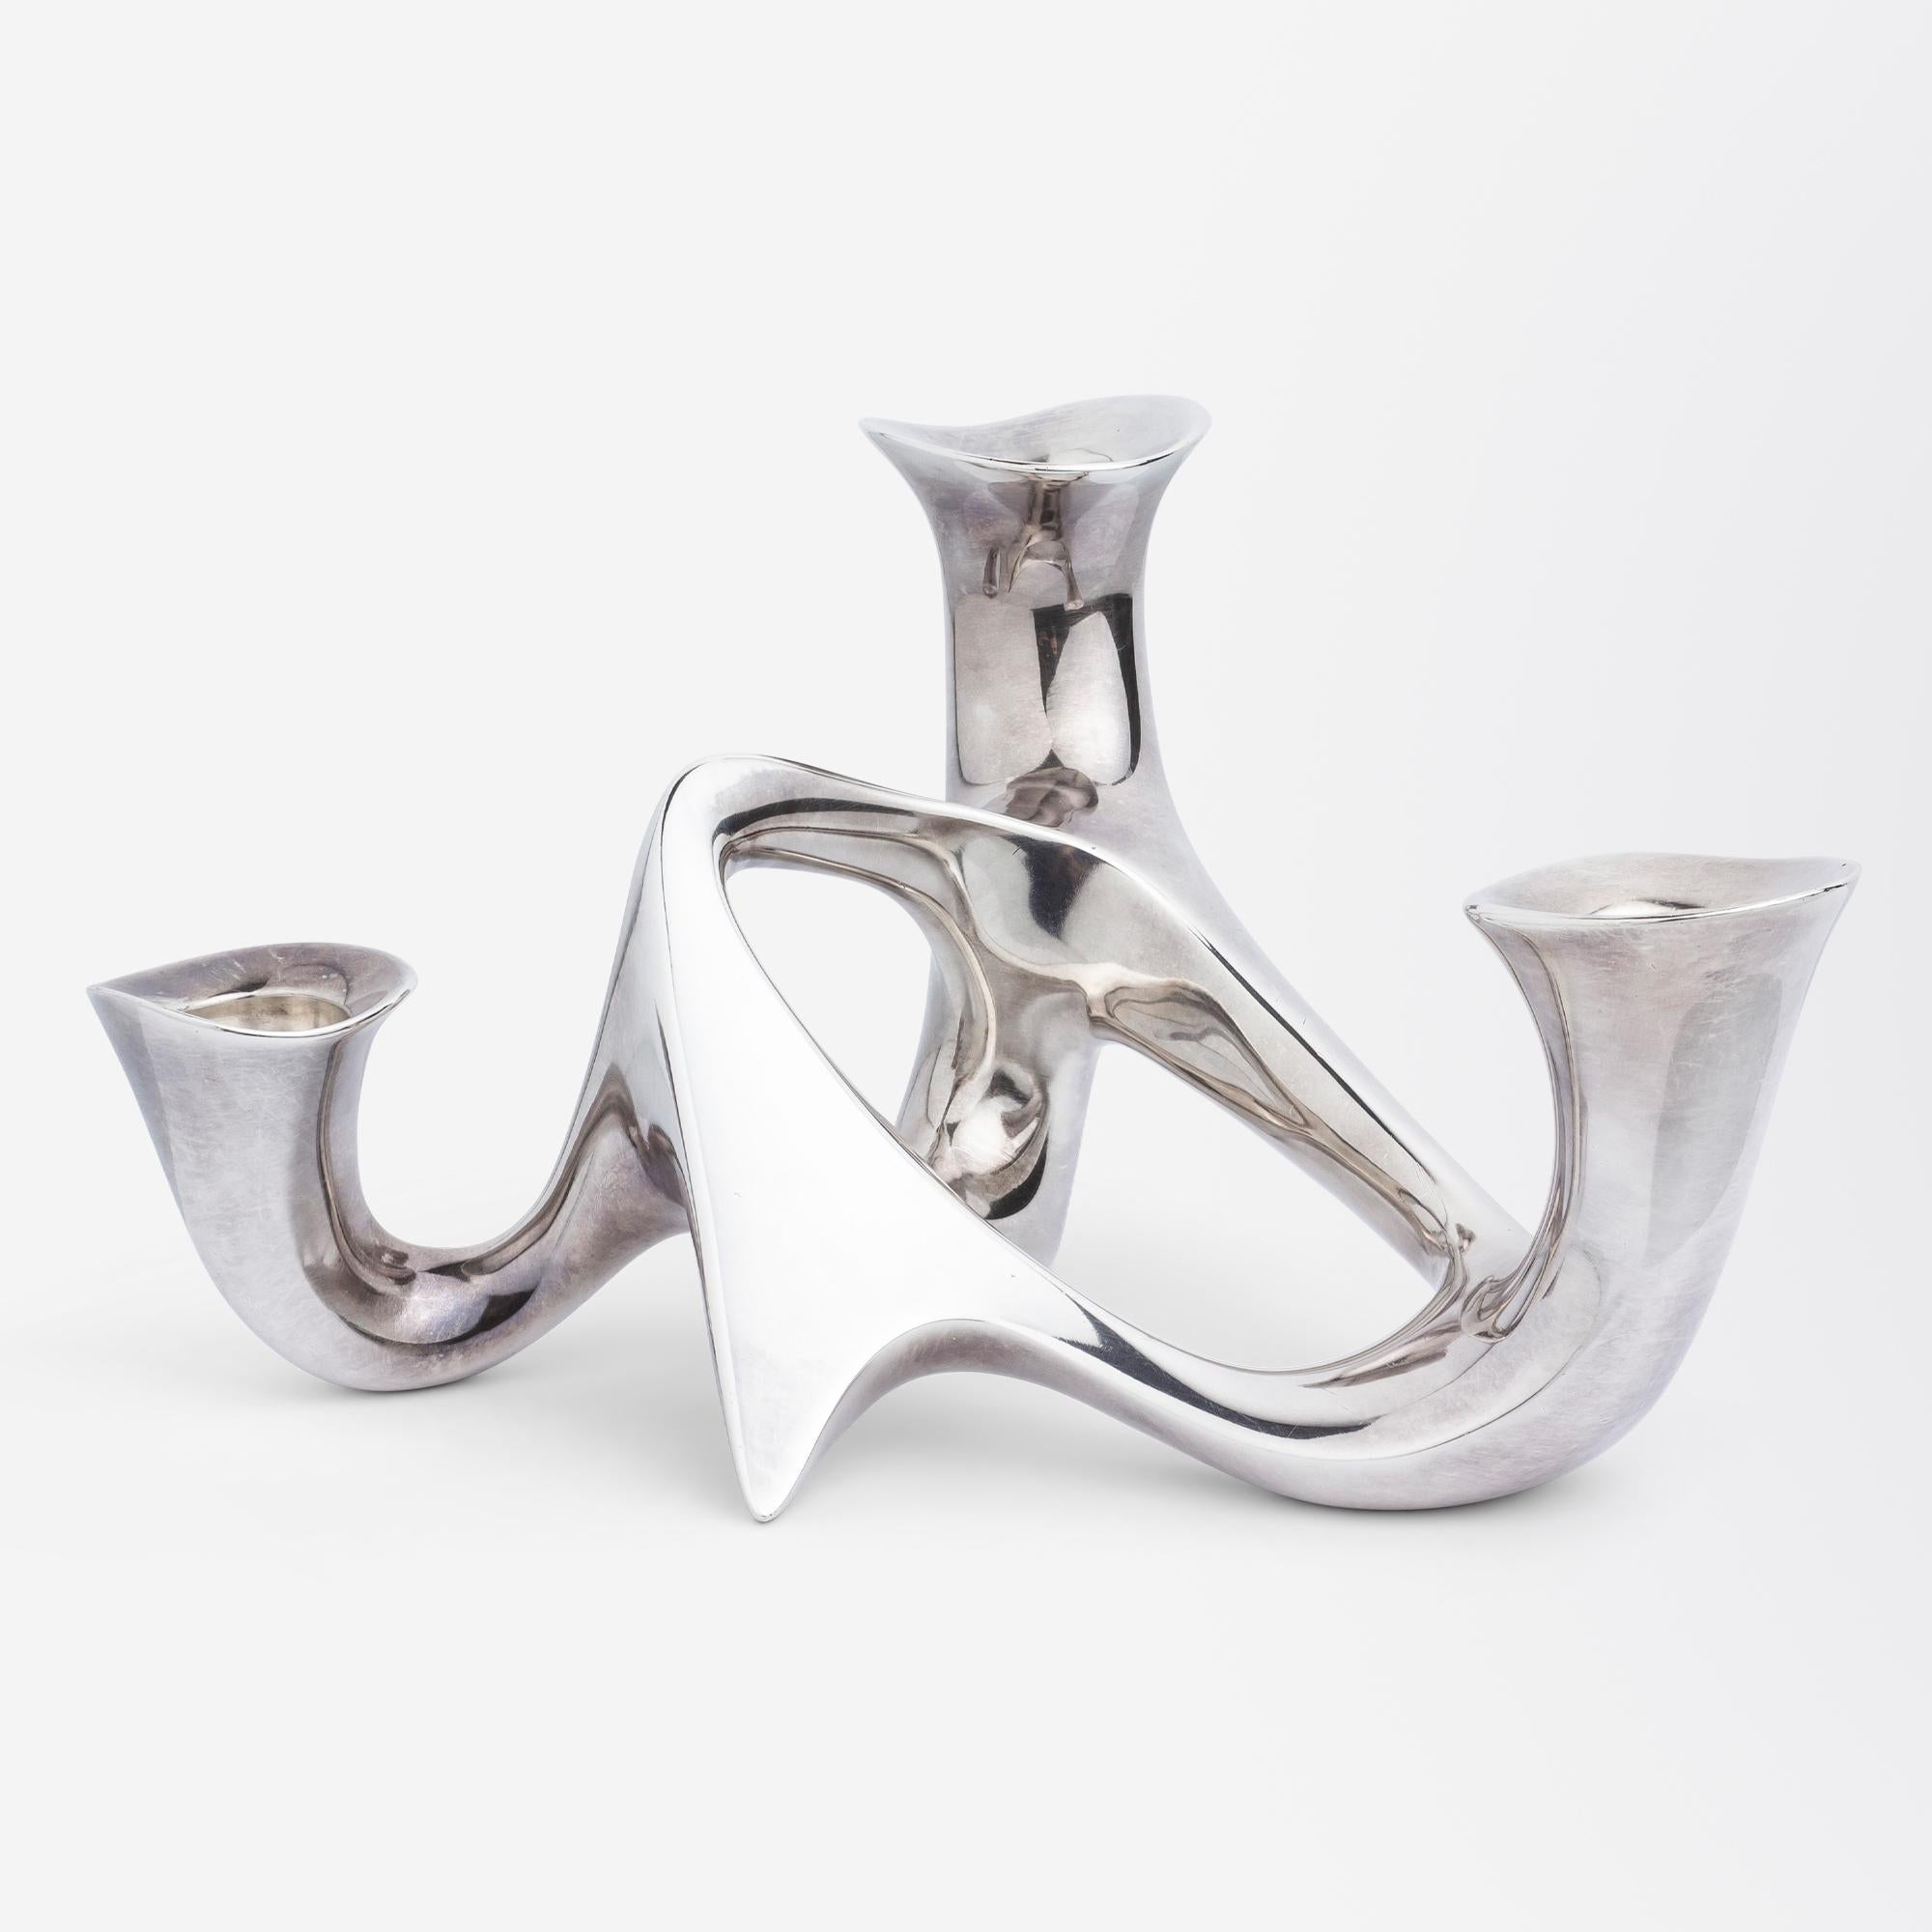 A modernist sterling silver candelabra with an organic, sculptural form designed by Henning Koppel (1918-1981) for Georg Jensen in 1946 entitled #956. This was Koppel's first hollowware design for Georg Jensen and was quite a radical departure for